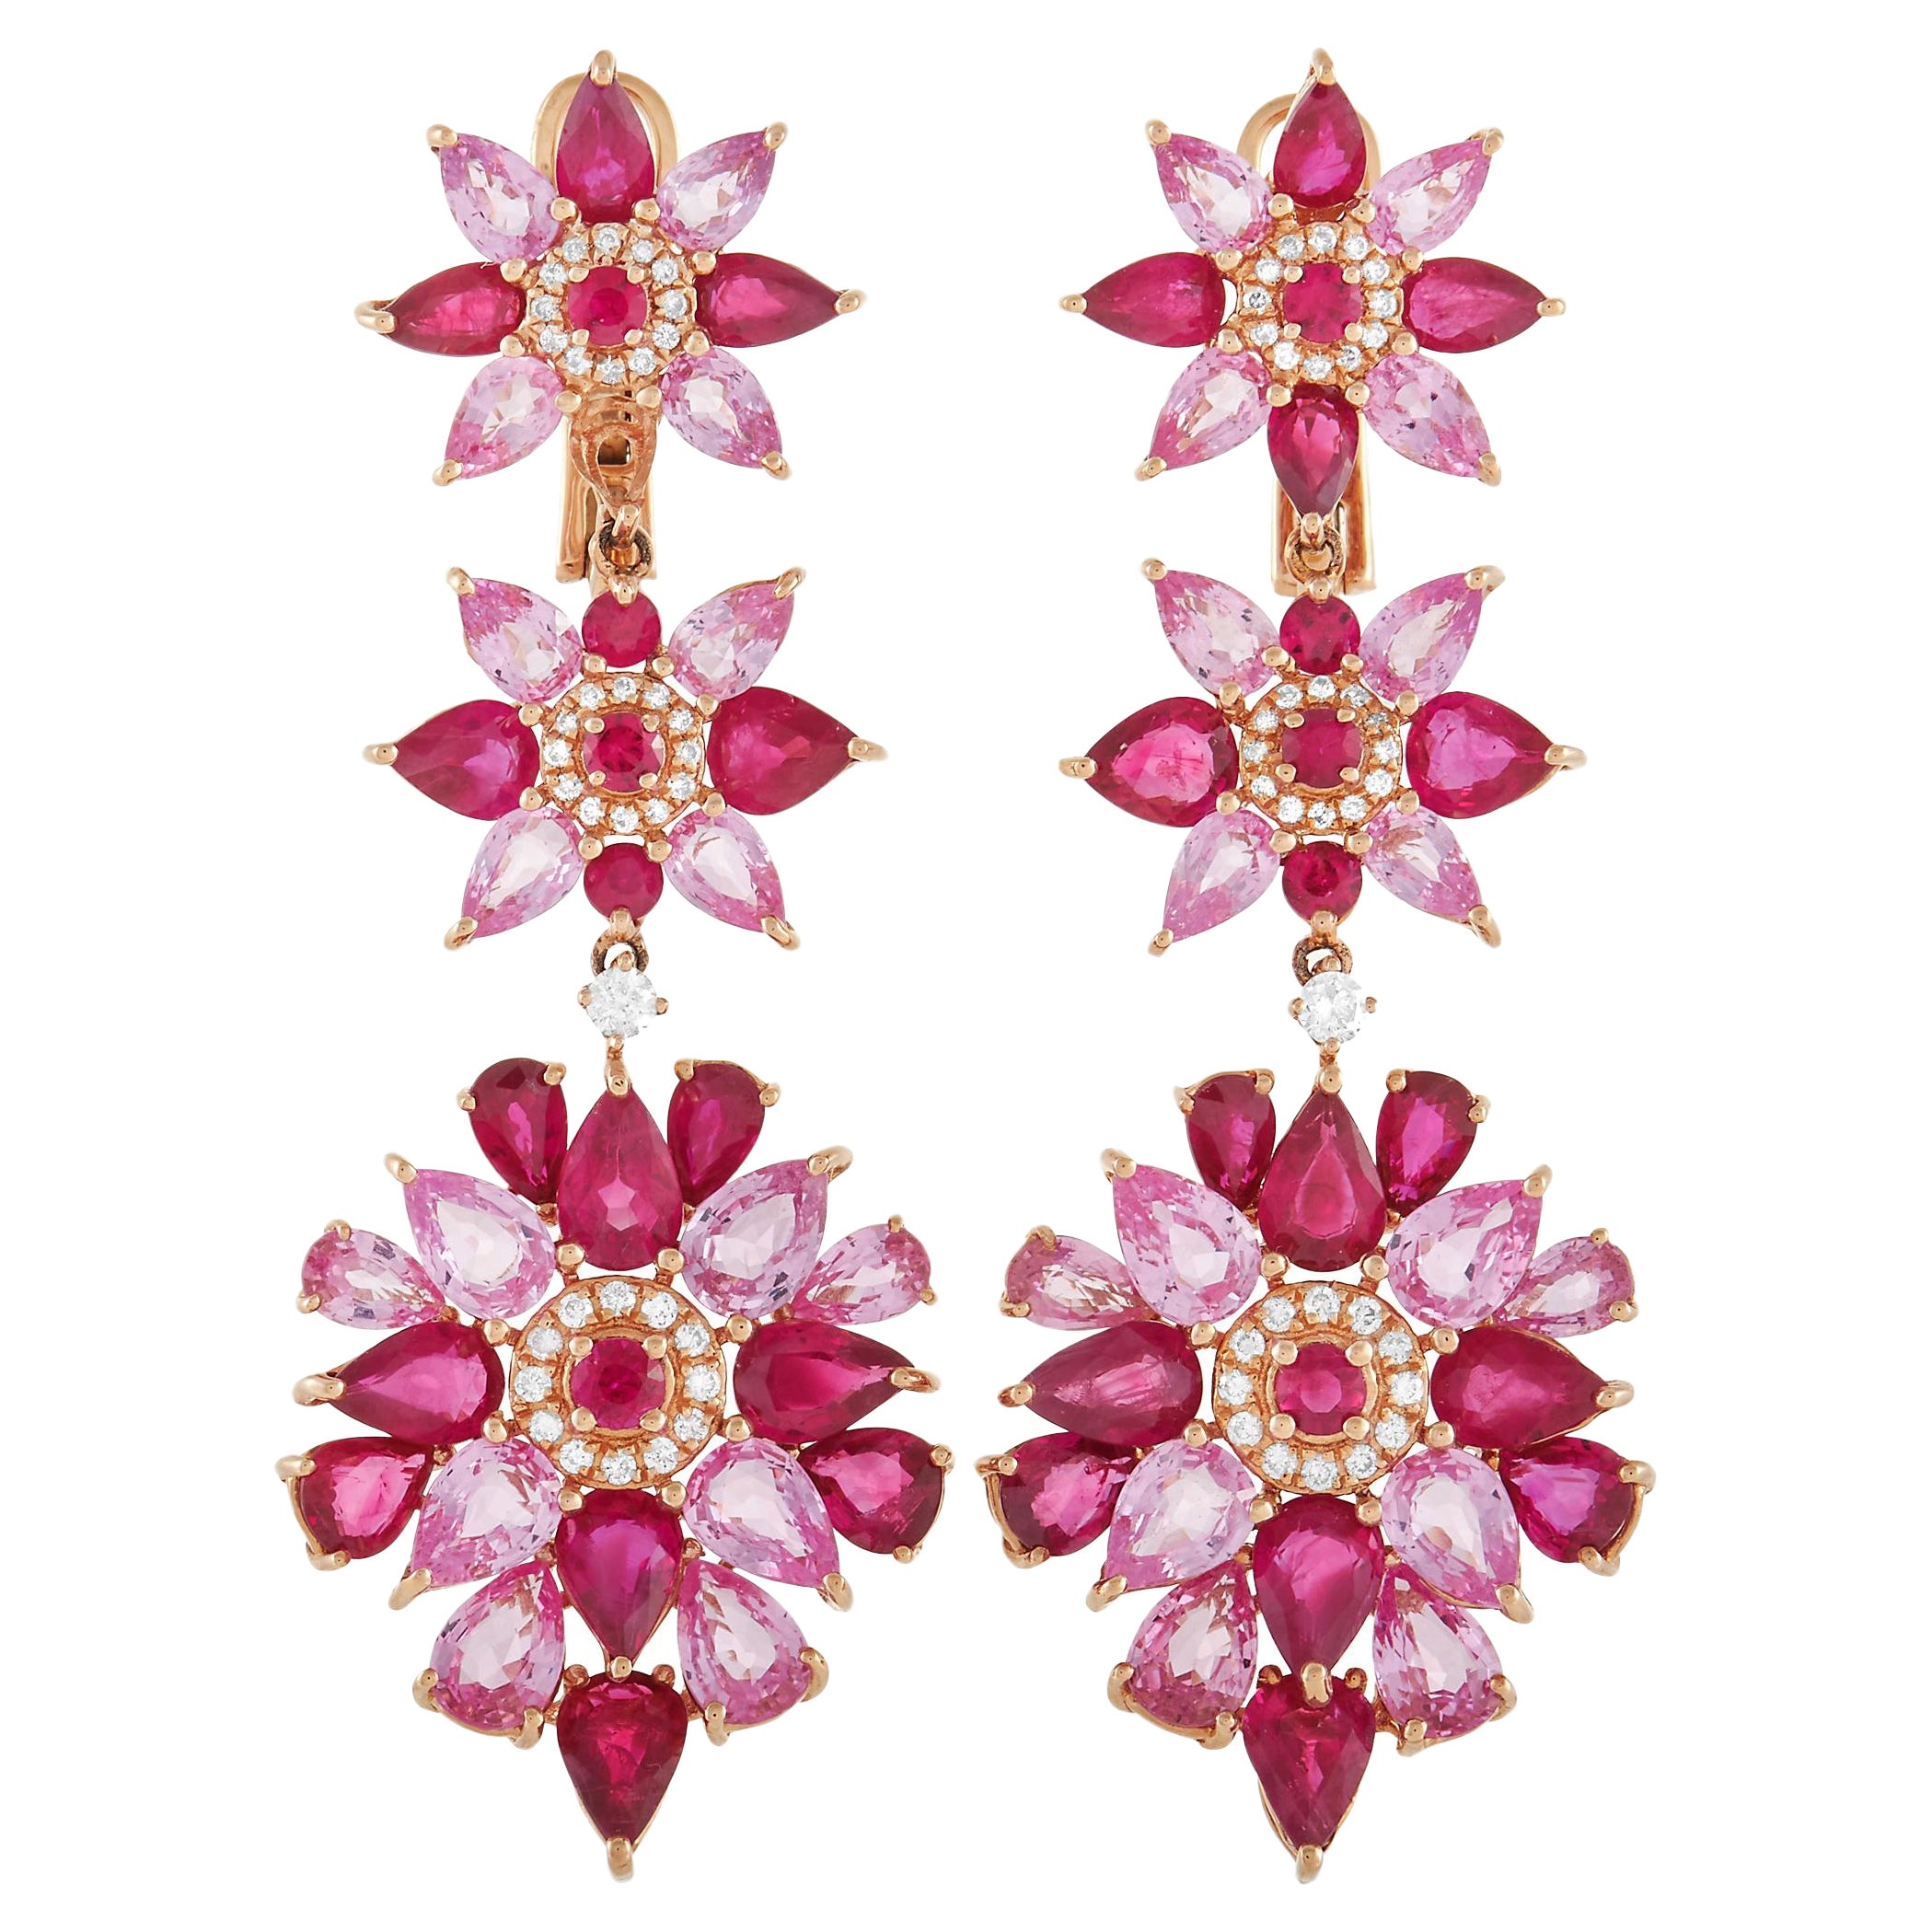 LB Exclusive French Collection 18K Rose Gold Diamond, Ruby and Sapphire Earrings